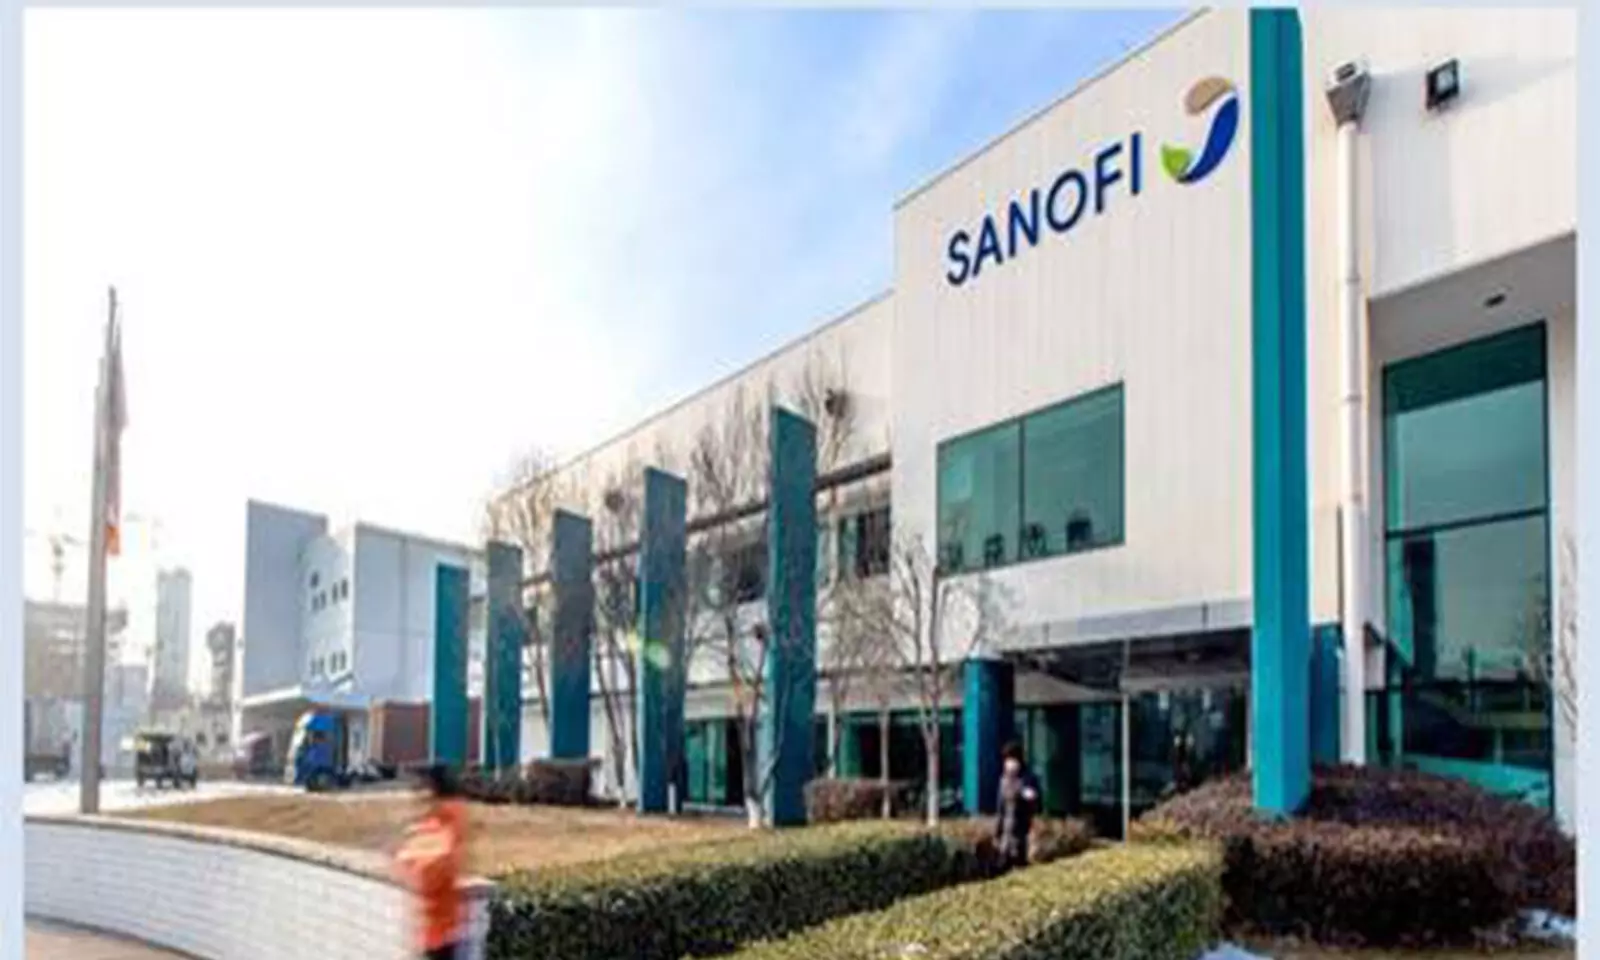 Sanofi Global Health unveils new brand Impact for distribution of 30 medicines in low-income countries